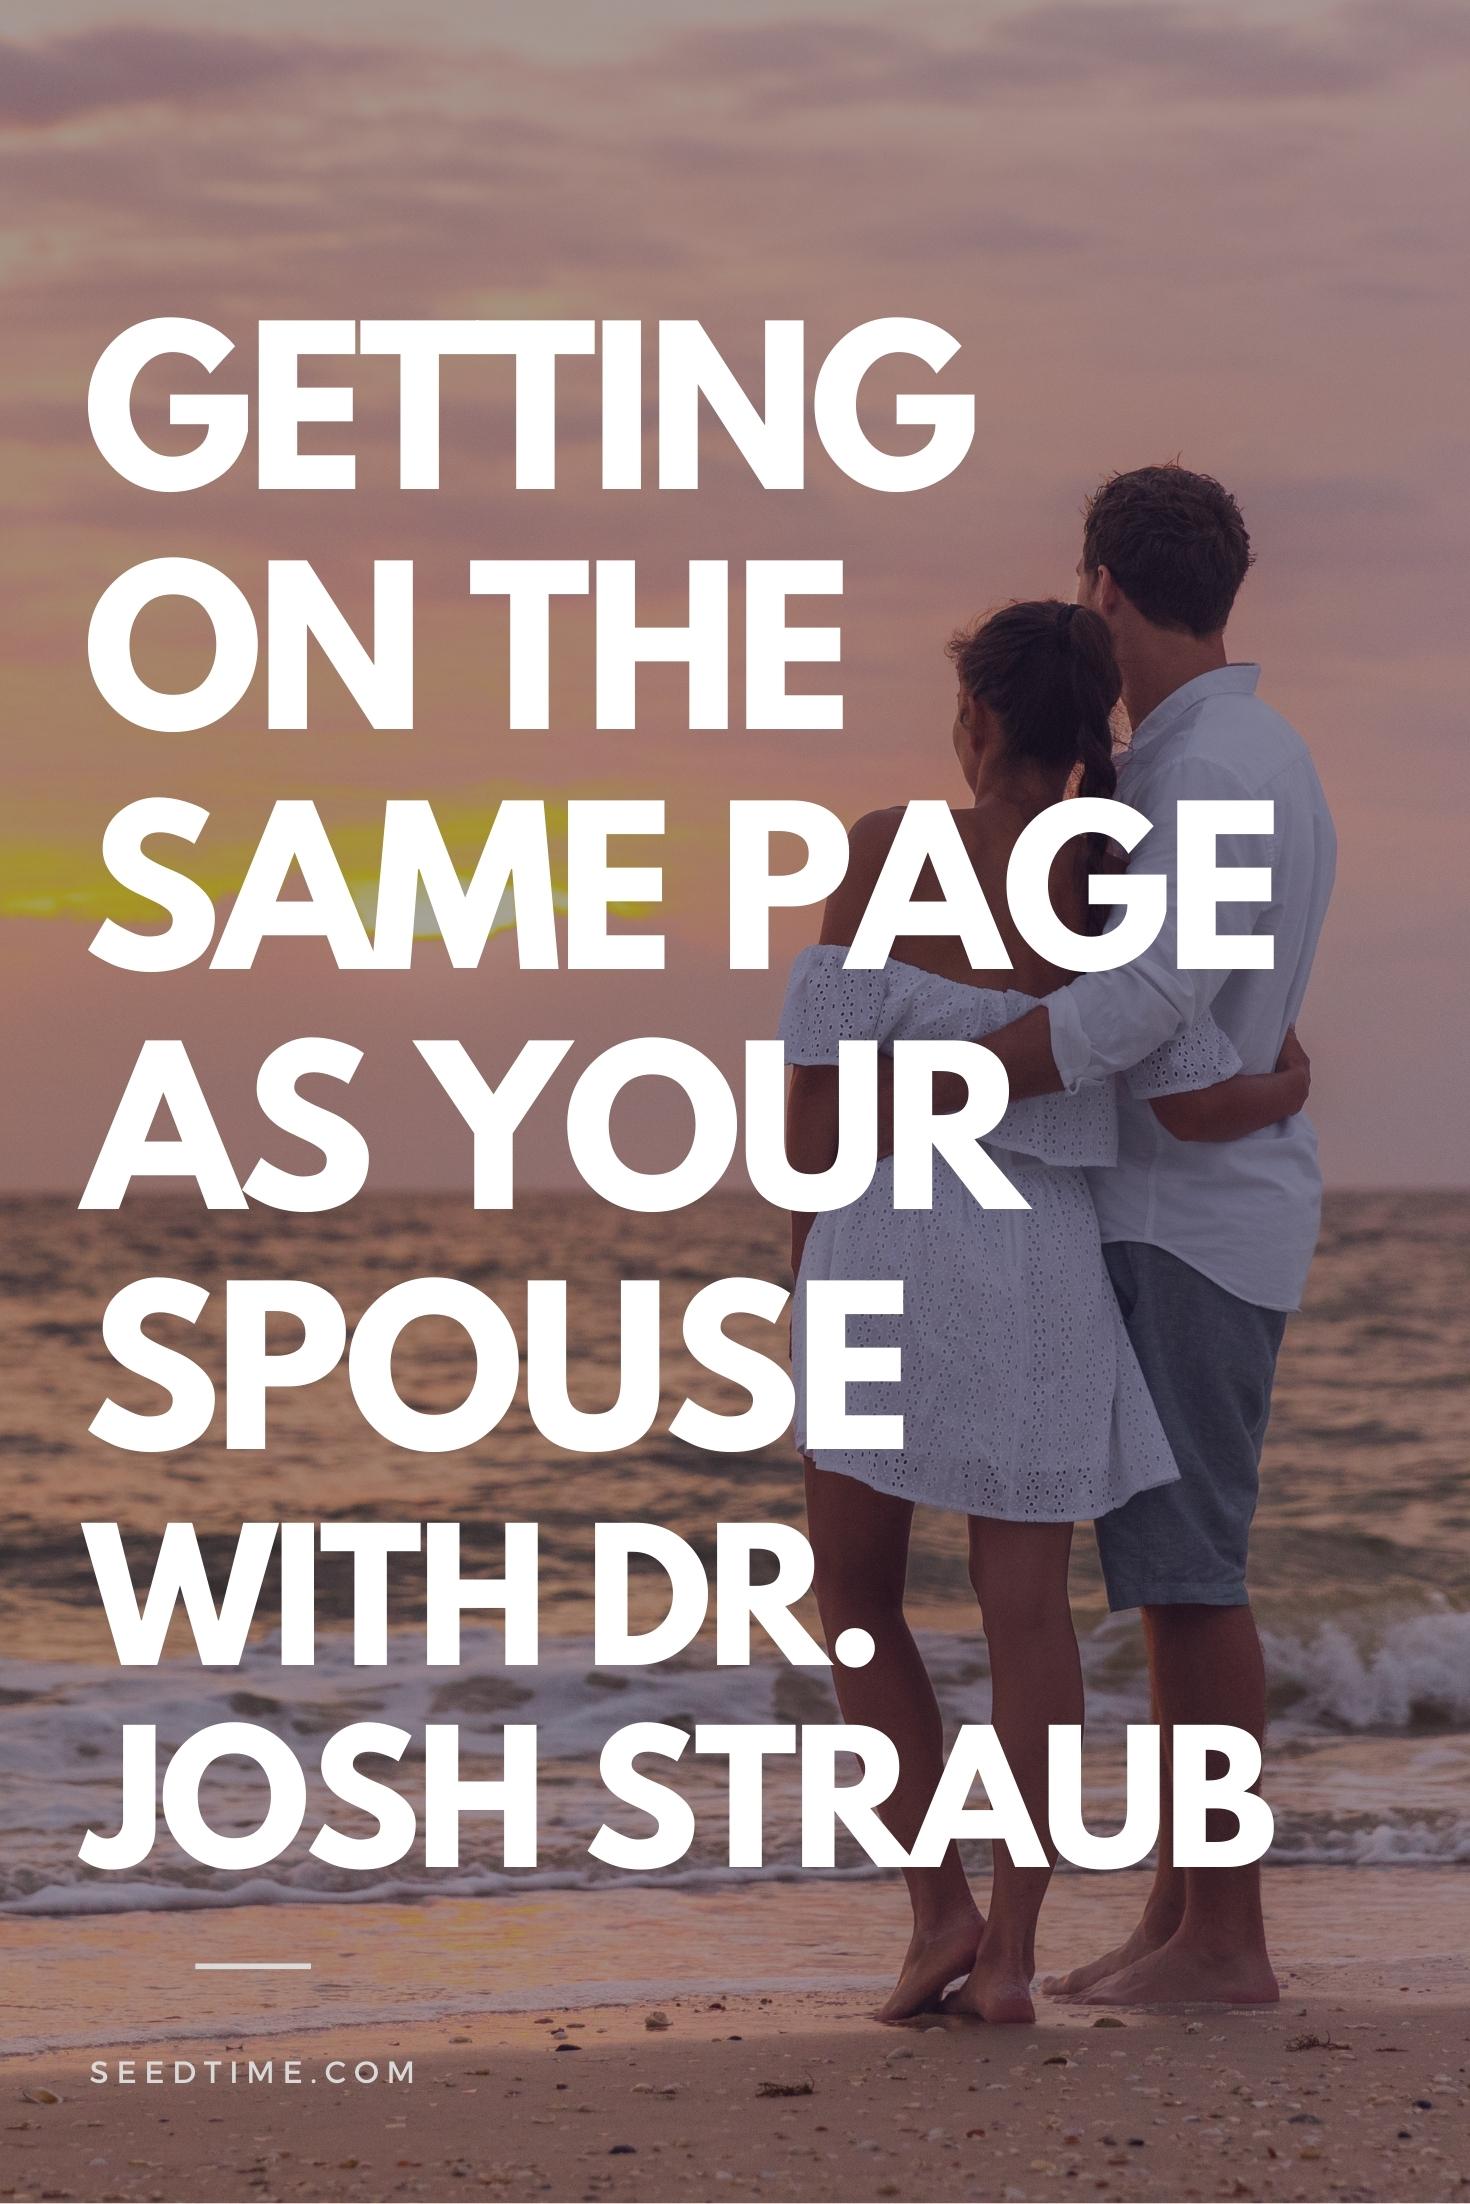 Josh Straub Famous at Home on getting on the same page with your spouse